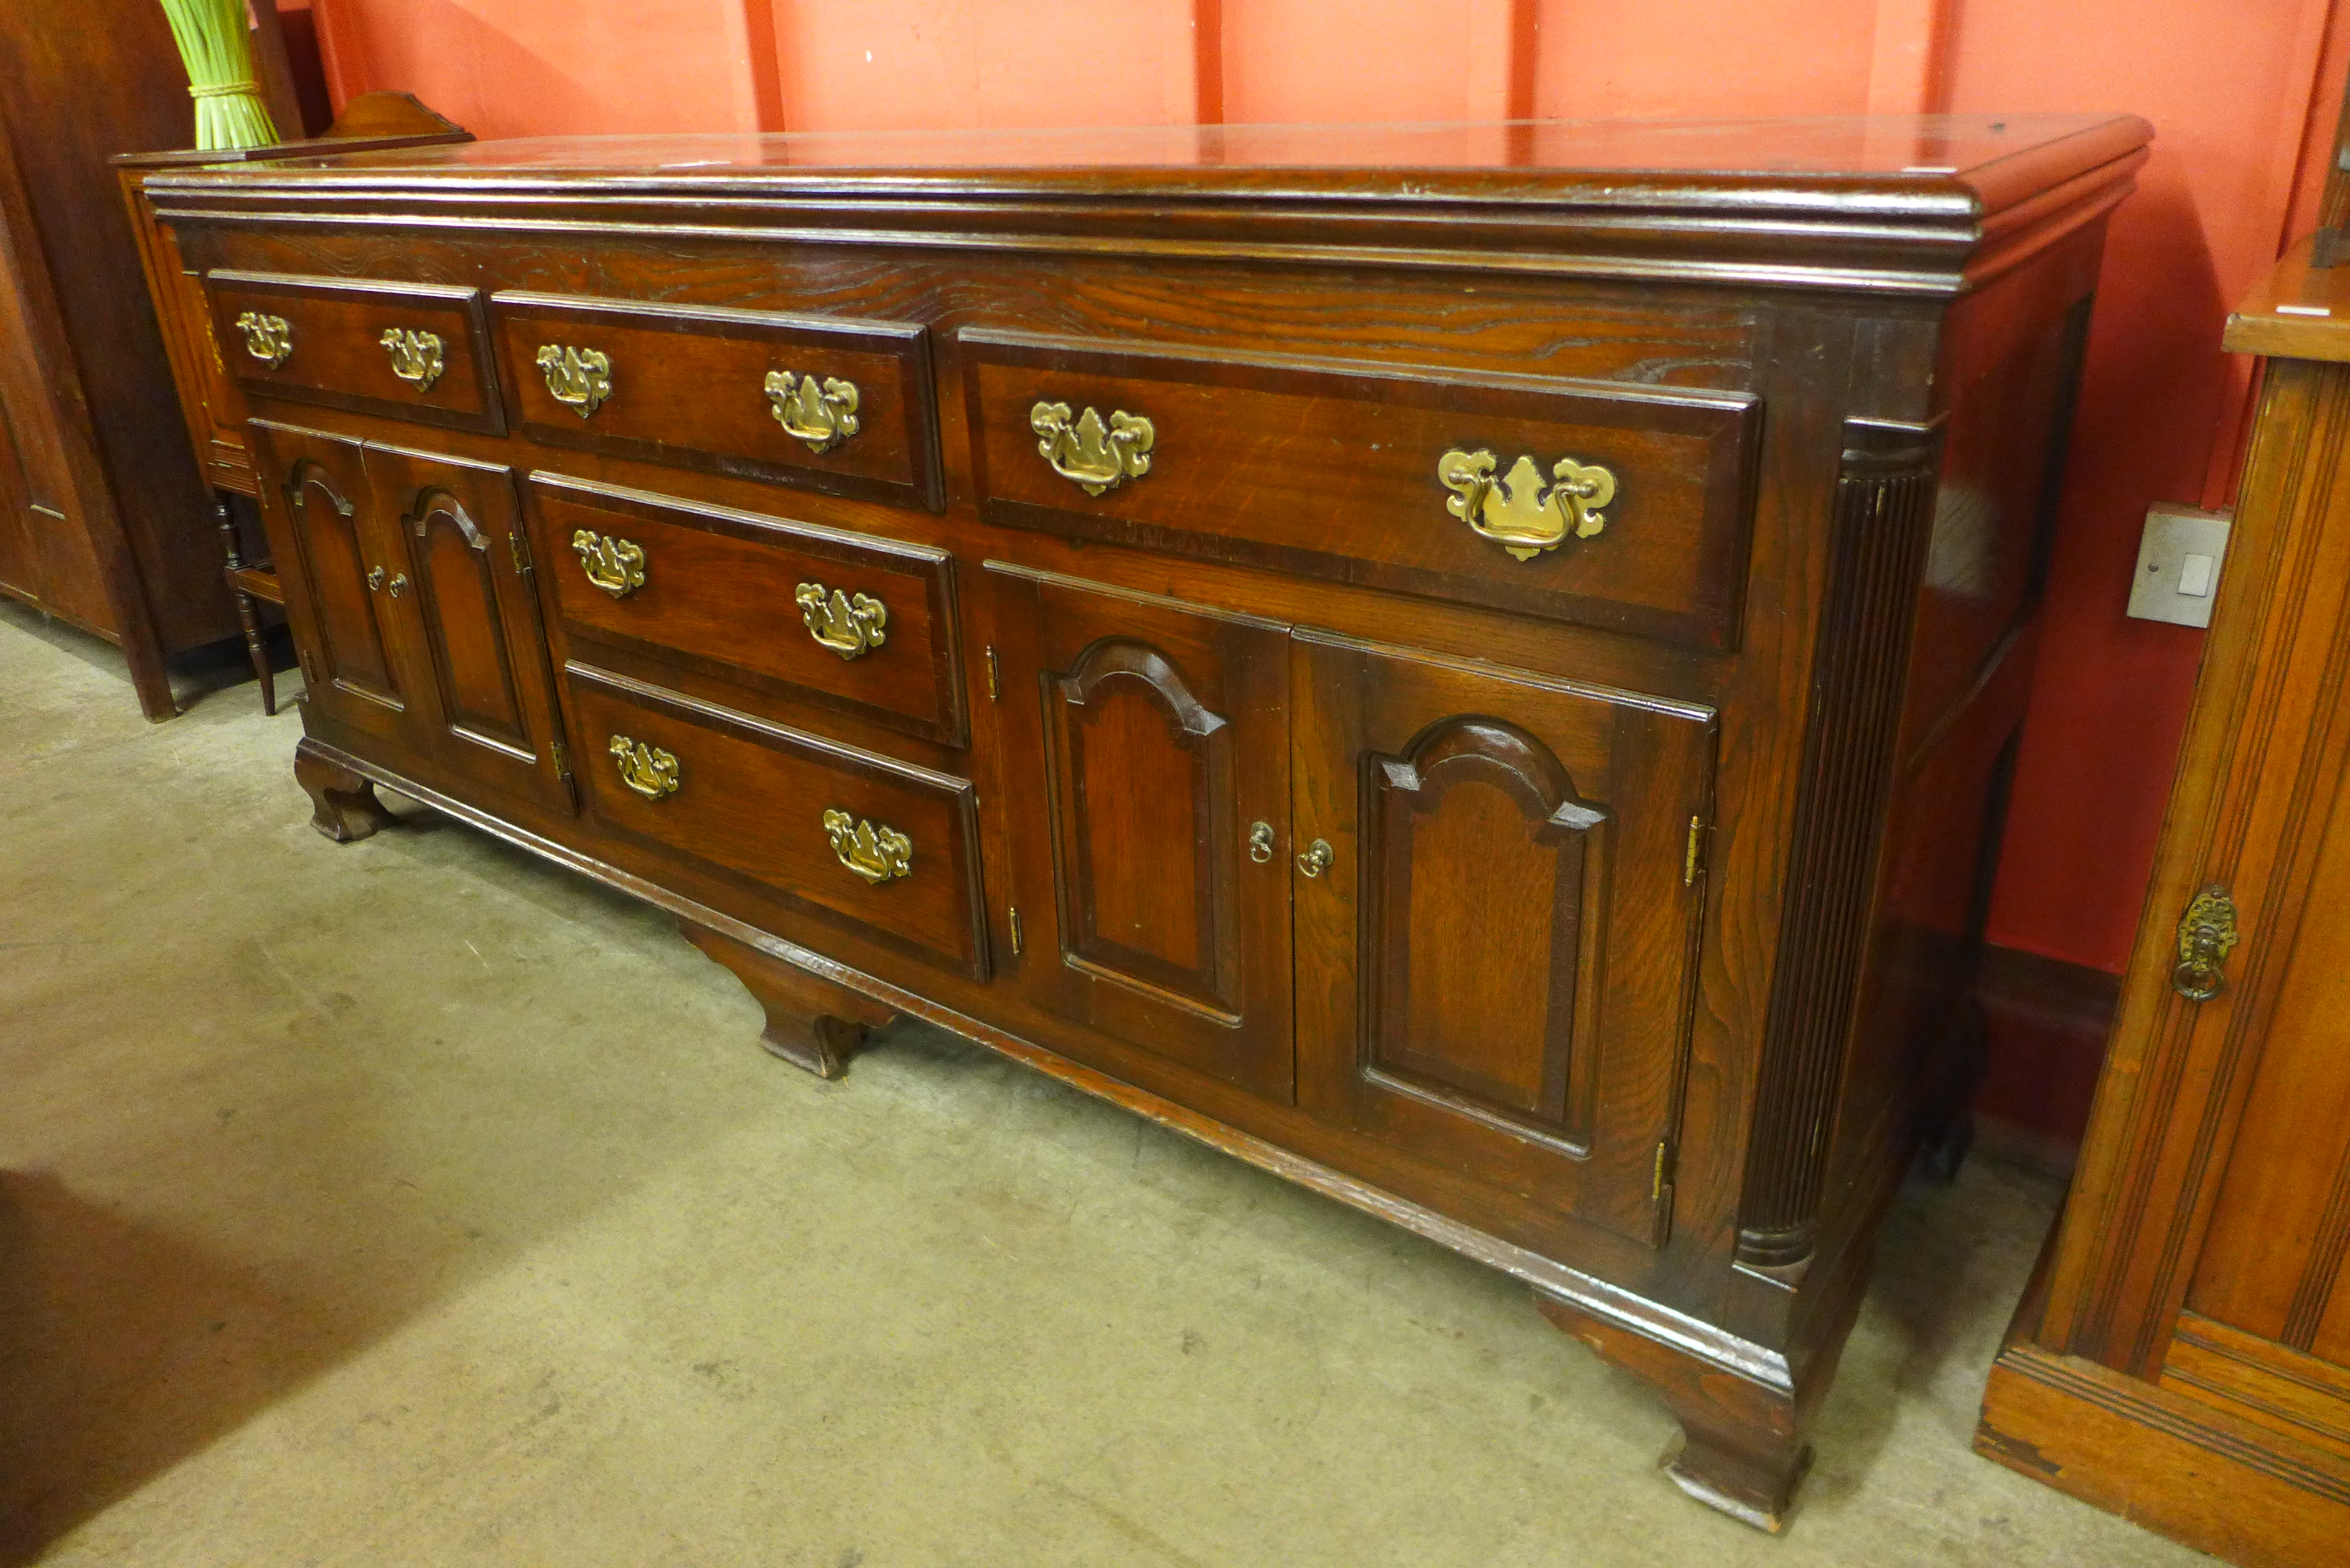 A George III style oak and mahogany crossbanded dresser, 88cms h, 200cms w, 55cms d